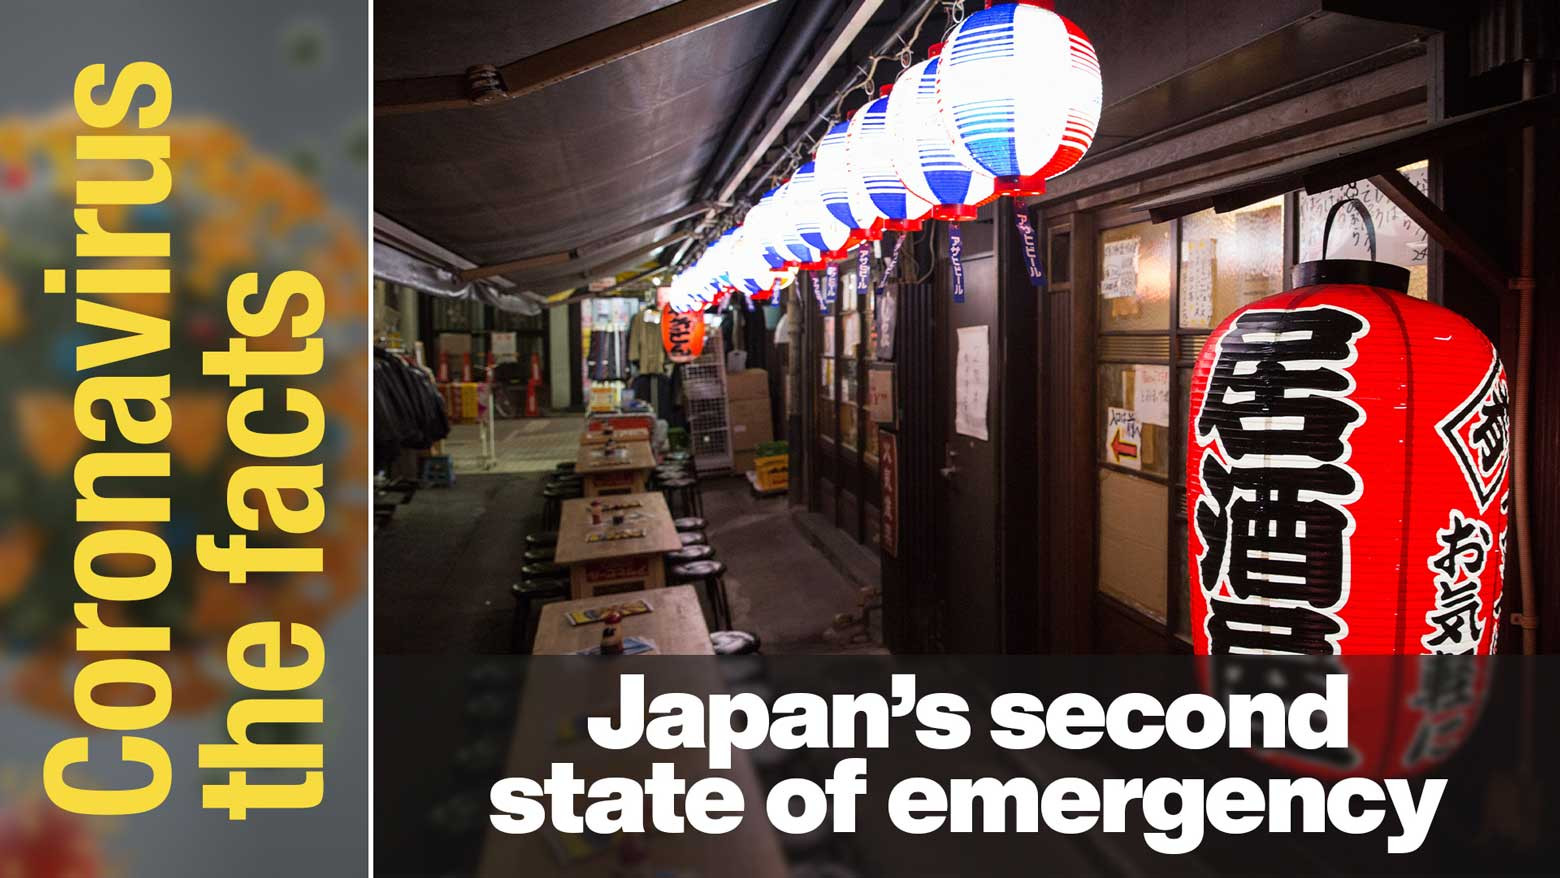 How will Japan's second state of emergency affect daily life?